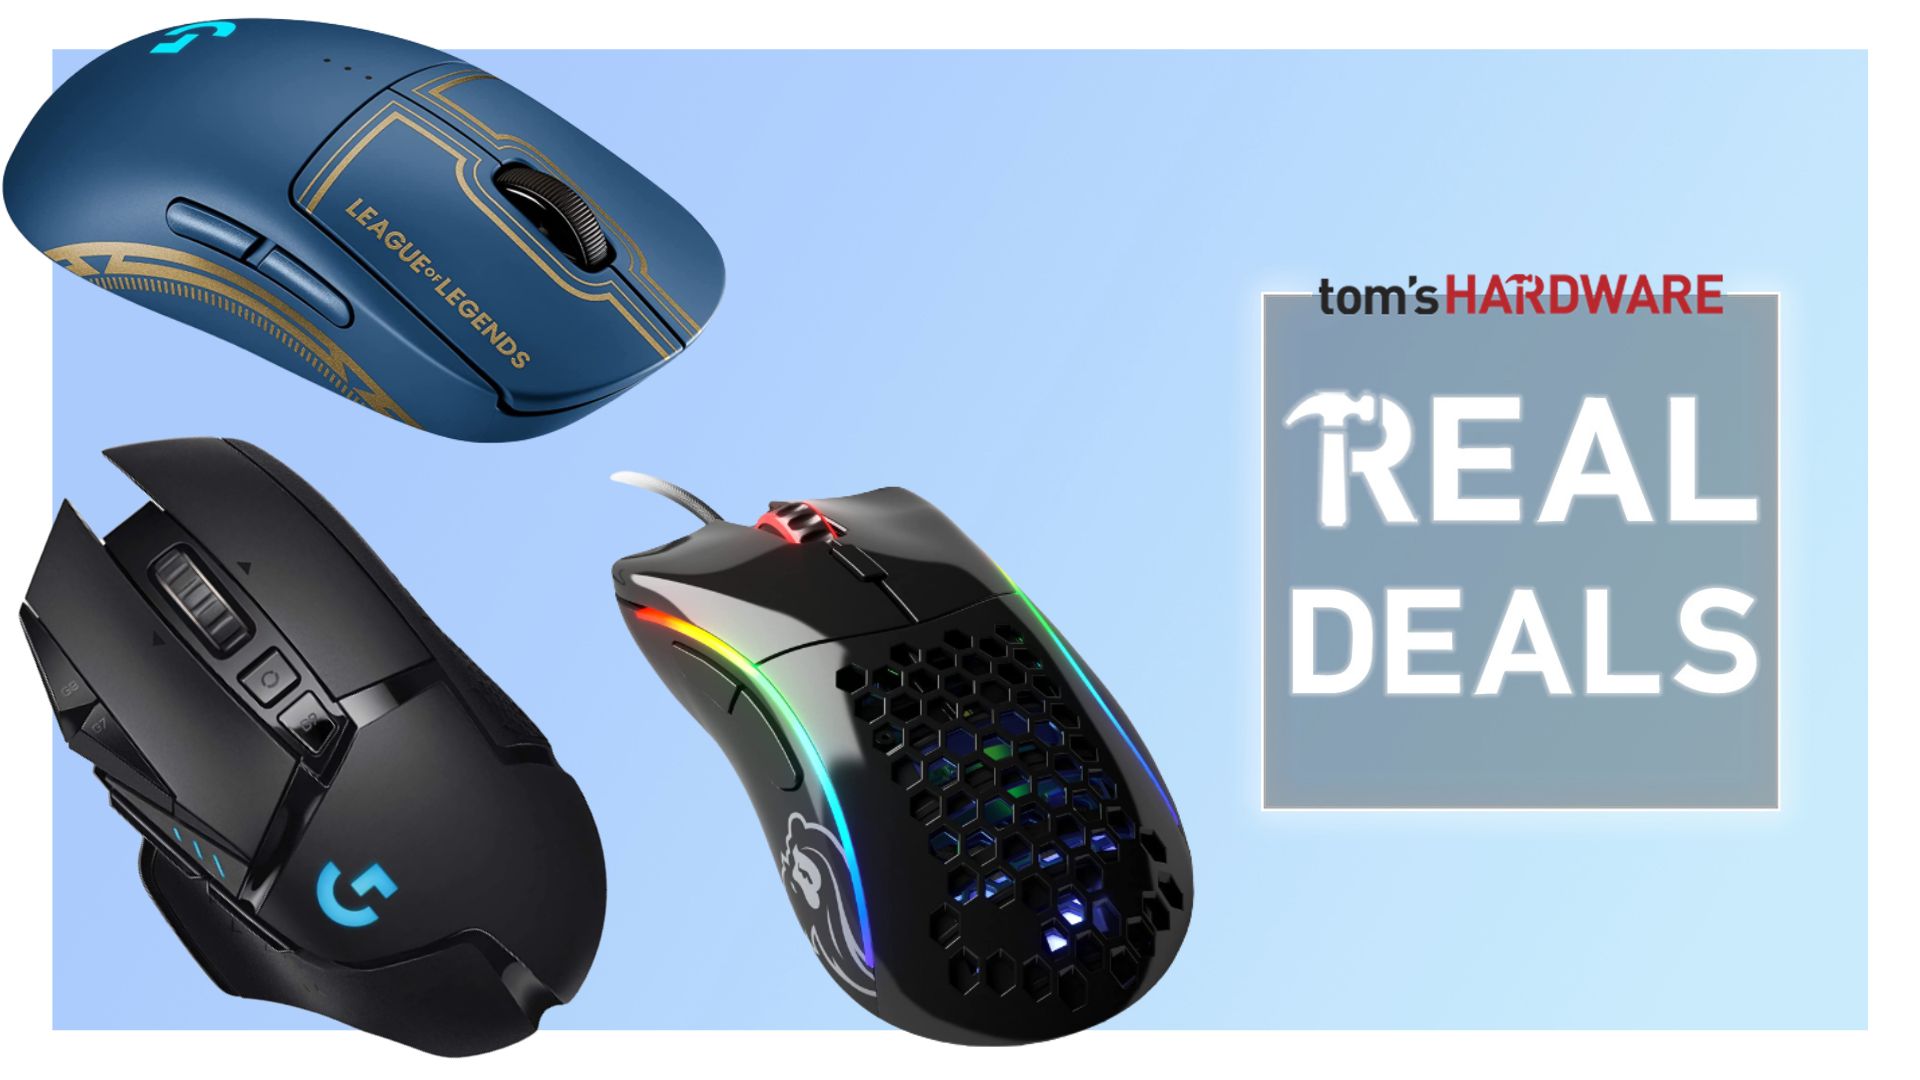 Pick Up The Fantastic Model D- Gaming Mouse For a Glorious $51: Real Deals